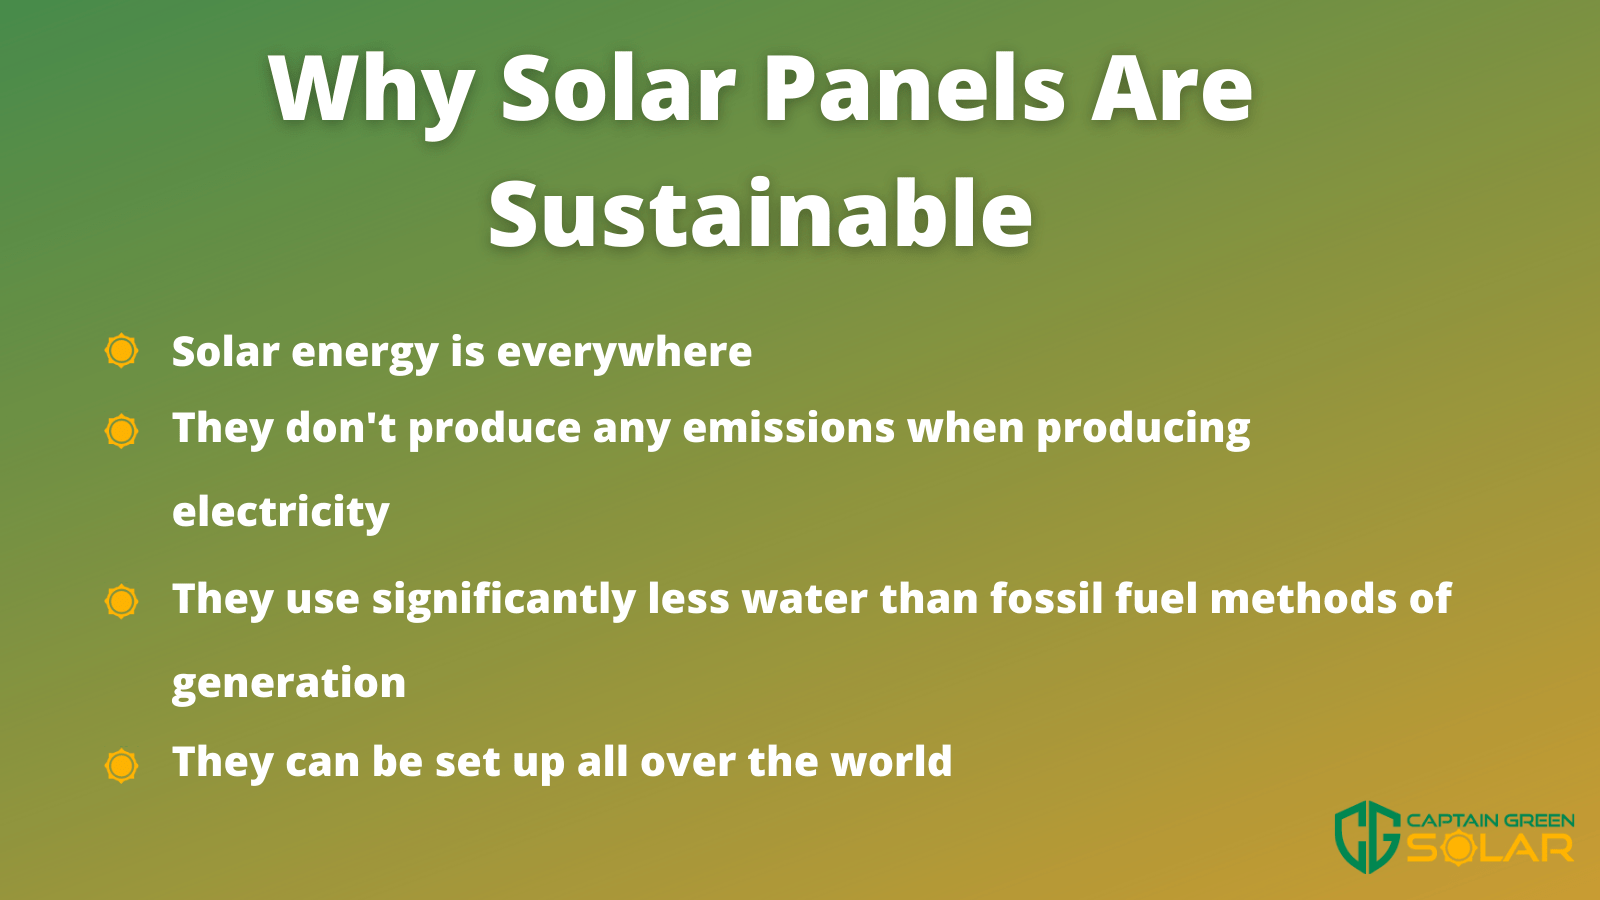 Are Solar Panels Sustainable